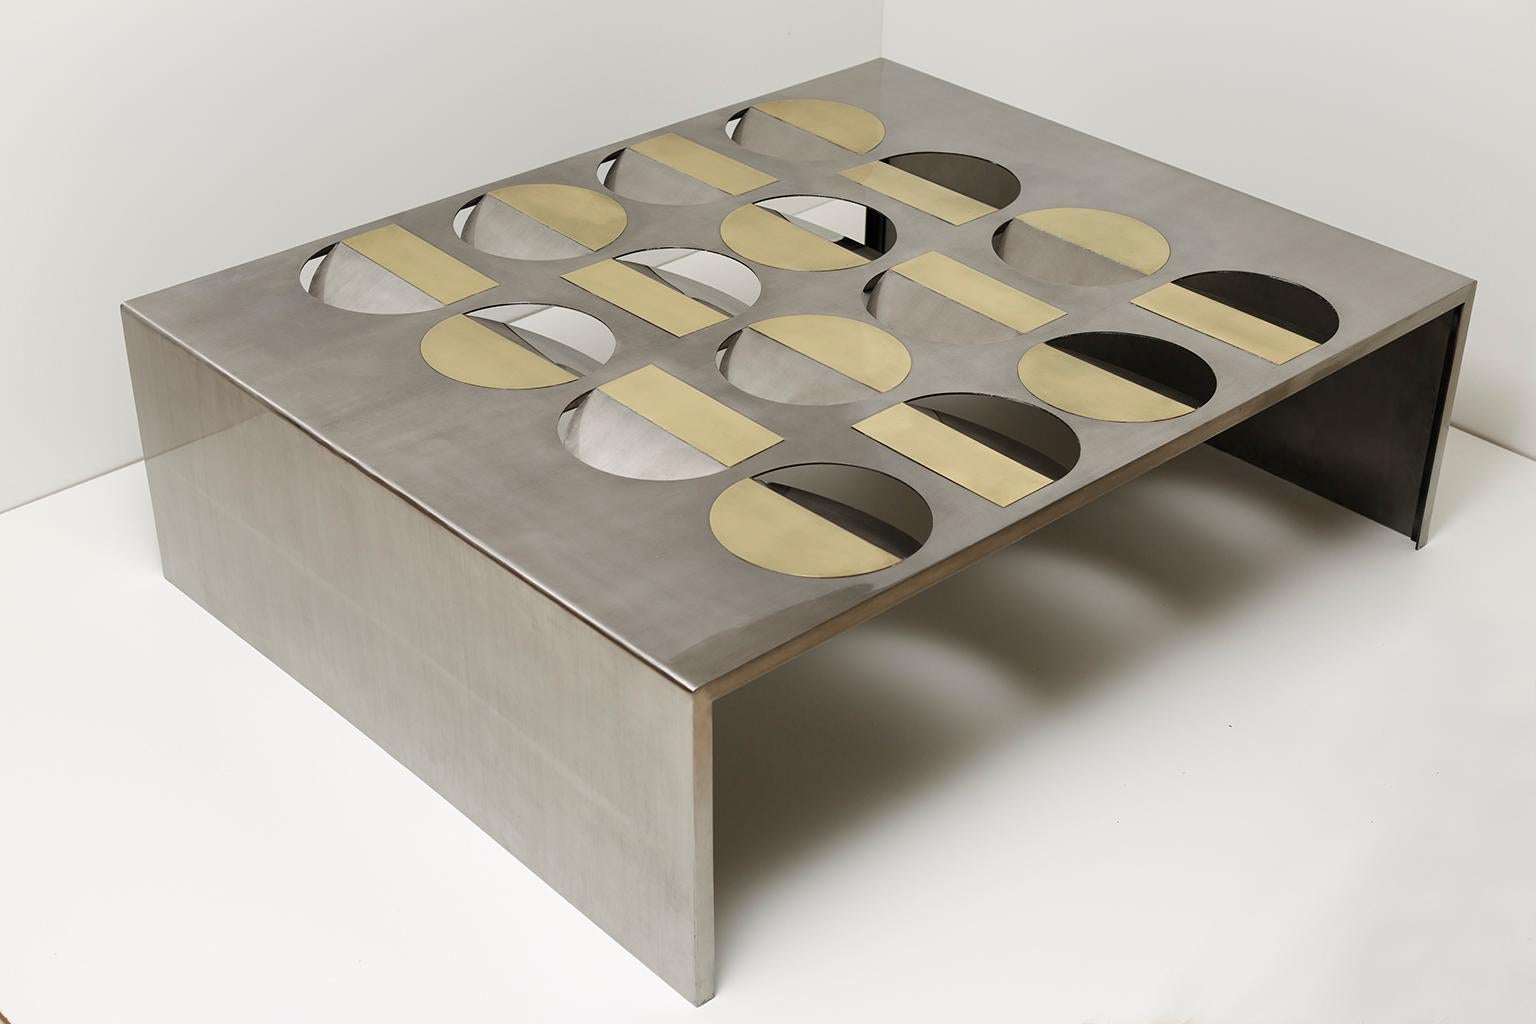 Stainless steel moonland coffee table by Ana Volante Studio
The Moon Collection
Dimensions: L 150 x W 120 x H 45 cm
Materials: Stainless steel, brass, glass on top

Ana Volante, founder of Ana Volante Studio, is a Venezuelan designer